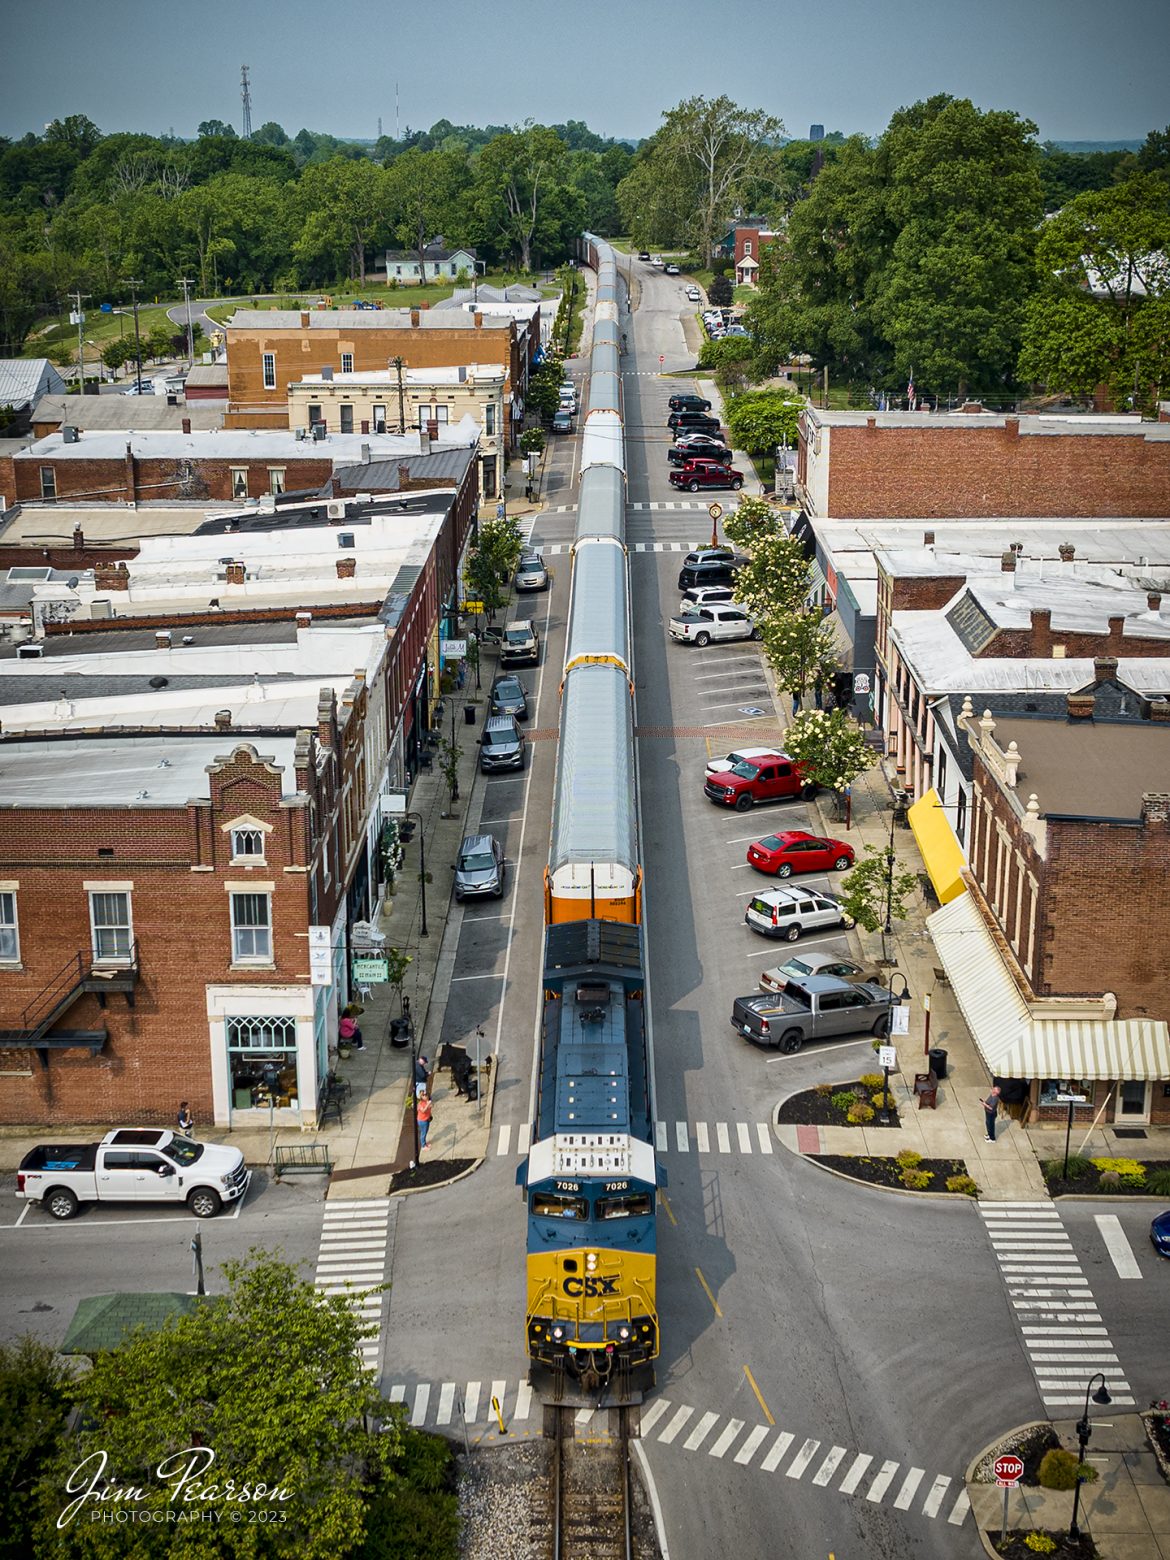 CSXT 7026 leads a loaded autorack train as they street run through downtown LaGrange, Kentucky, headed north on the LCL Subdivision on May 17th, 2023.

According to the Train Aficionado website: CSX runs through La Grange on what is known as the LCL Subdivision. This 101-mile line connects Covington, Kentucky, to Louisville, Kentucky. The railroad tracks run right through the heart of the town literally. The railroad tracks are embedded on the eastbound side of the roadway for the whole stretch of downtown. The trains pass the city business district which includes quaint shops and restaurants. When looking up railfanning in La Grange most websites state anywhere from 14 to 20 trains travel through here daily.

According to Hidden History of La Grange, Ky by author and local historian Nancy Stearns, LaGrange is known for its trains. It became an important junction for the railroad, with lines going to Frankfort and Cincinnati, and this made the town an important stop for travelers and businesses. The interurban electric rail car made round trips from LaGrange to Louisville daily until automobiles surpassed the interurban in popularity.

Tech Info: DJI Mavic 3 Classic Drone, RAW, 24mm, f/2.8, 1/1250, ISO 100.

#trainphotography #railroadphotography #trains #railways #dronephotography #trainphotographer #railroadphotographer #jimpearsonphotography #CSXtrains #mavic3classic #drones #trainsfromtheair #trainsfromadrone #emptycoaltrain #autoracktrain #kentuckytrains #LaGrangeKy #streetrunningtrains